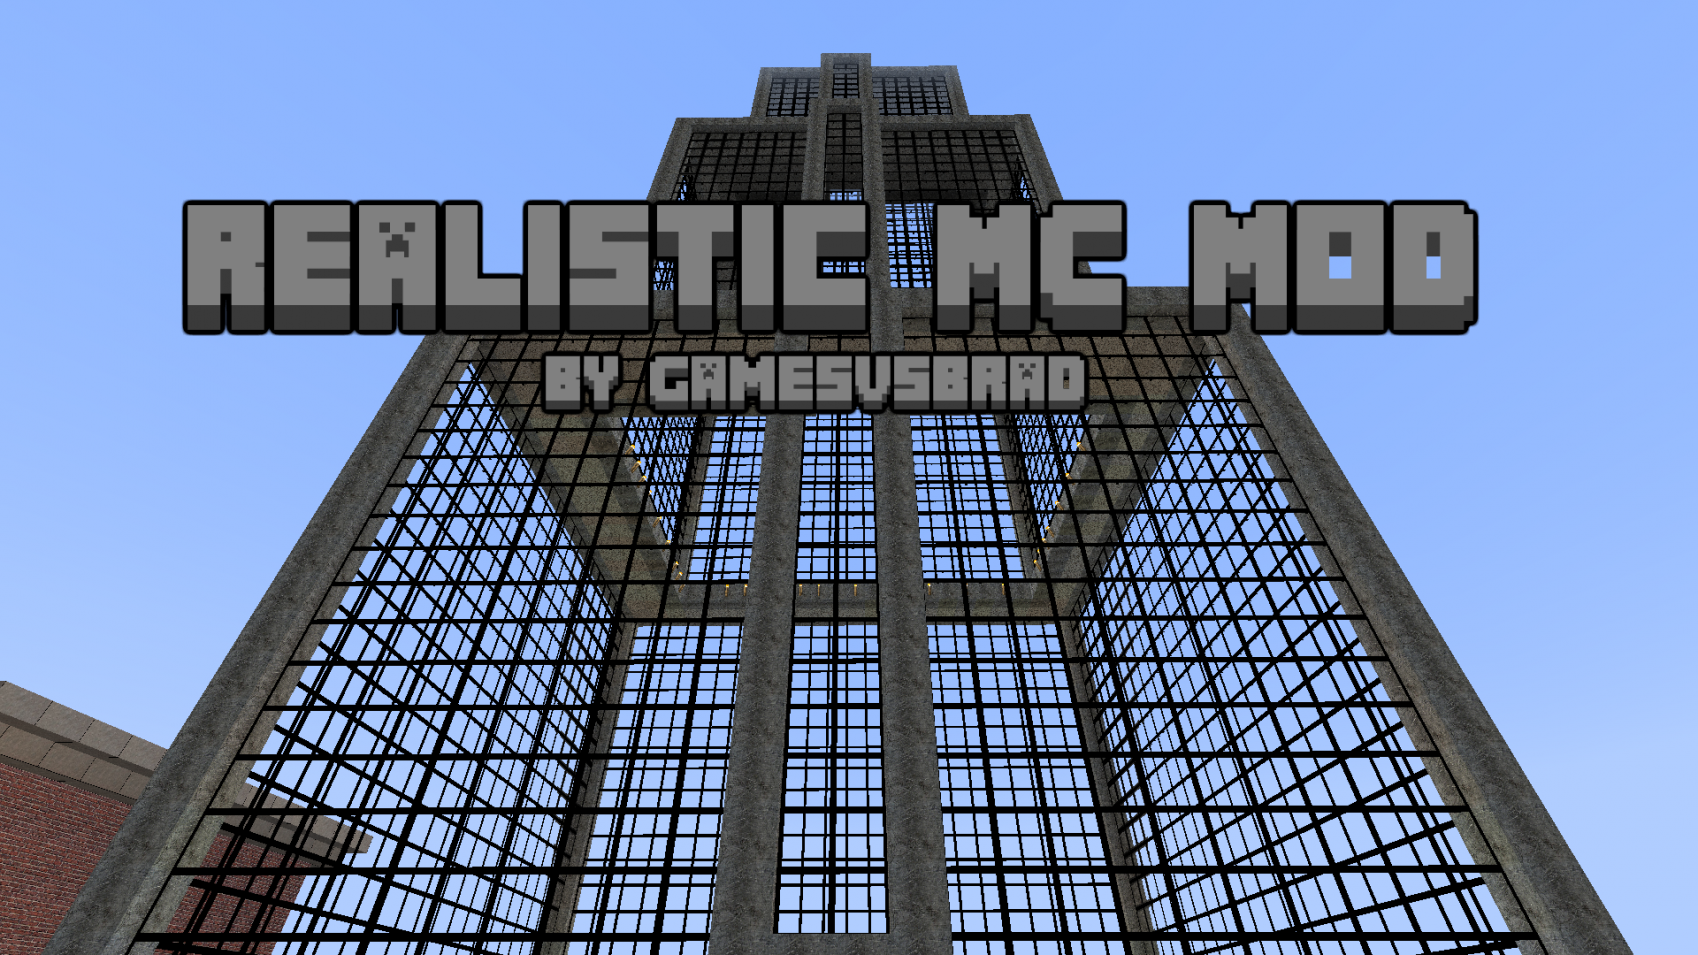 What is the title of this picture ? Realistic MC Mod | MCreator